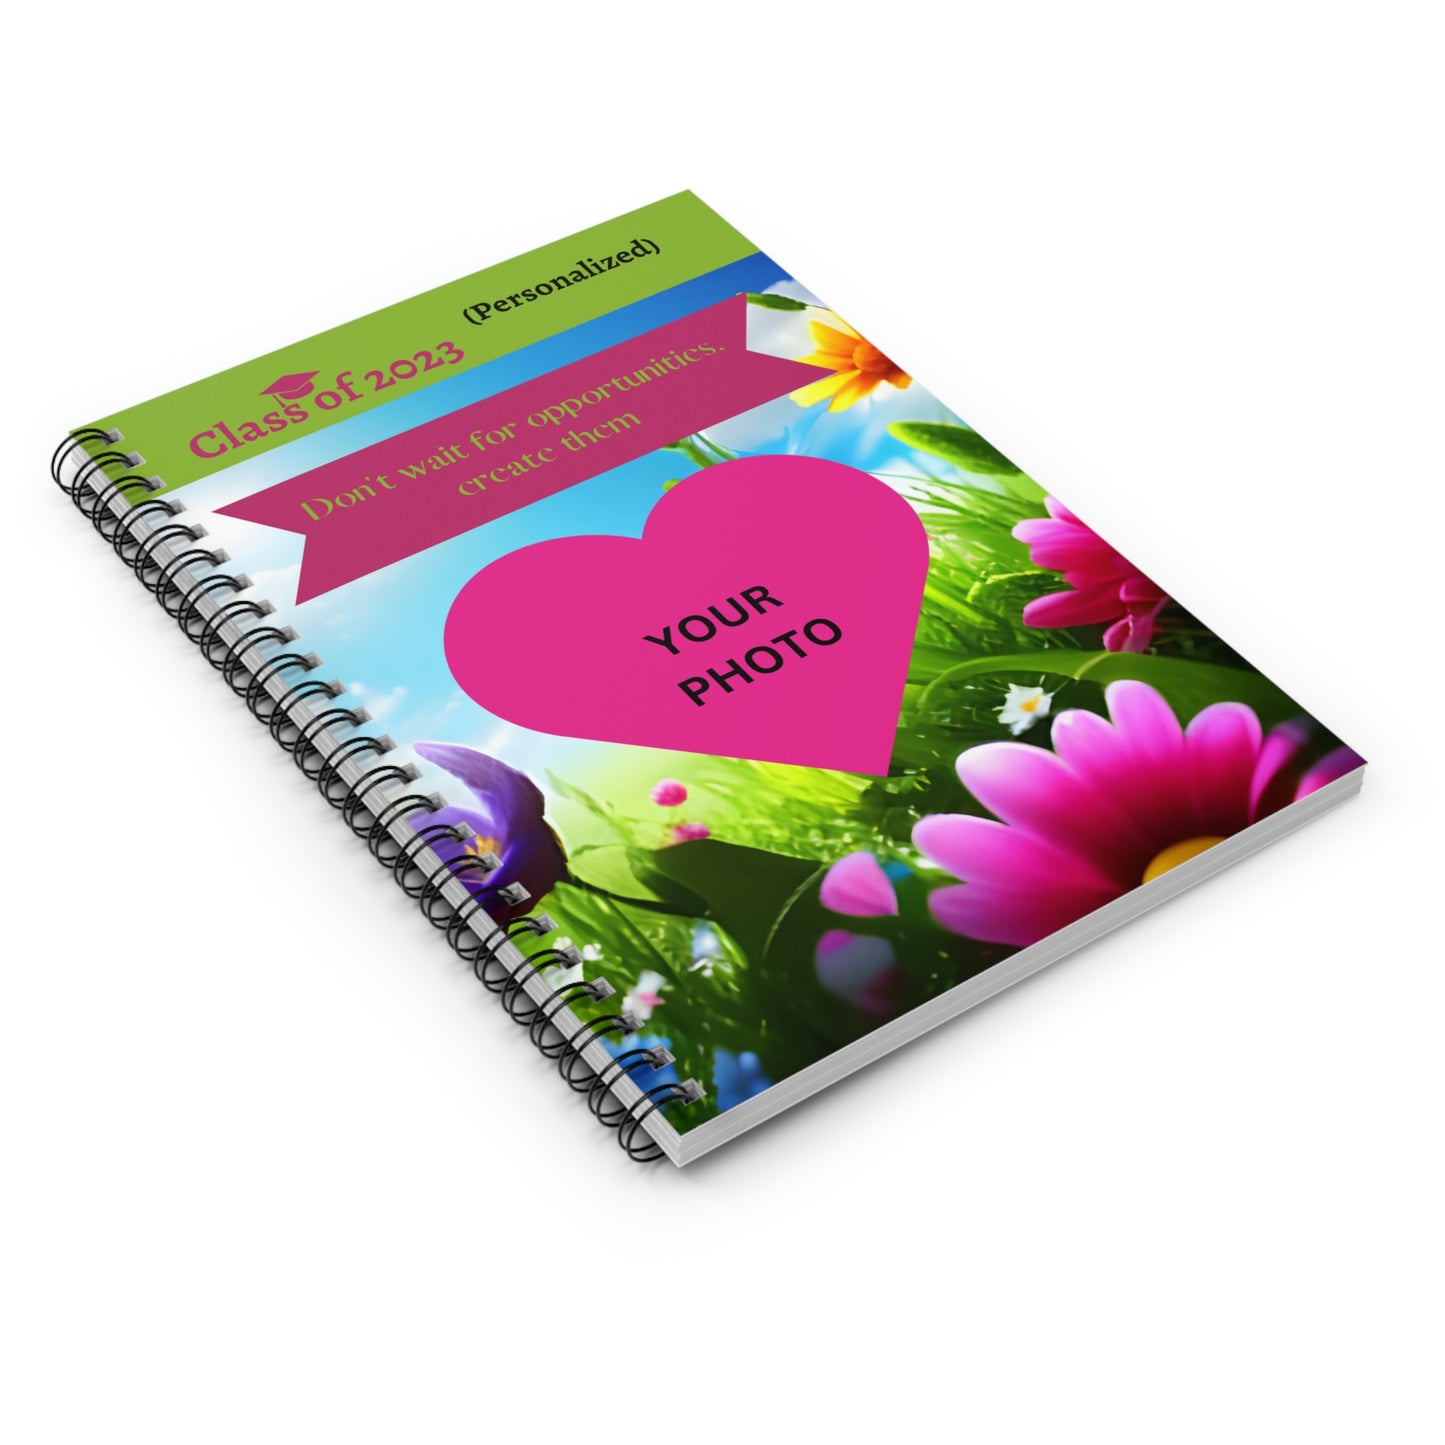 Class of 2023 Graduate Journal - (AA Young Lady 2) Ruled Line - (PERSONALIZED)